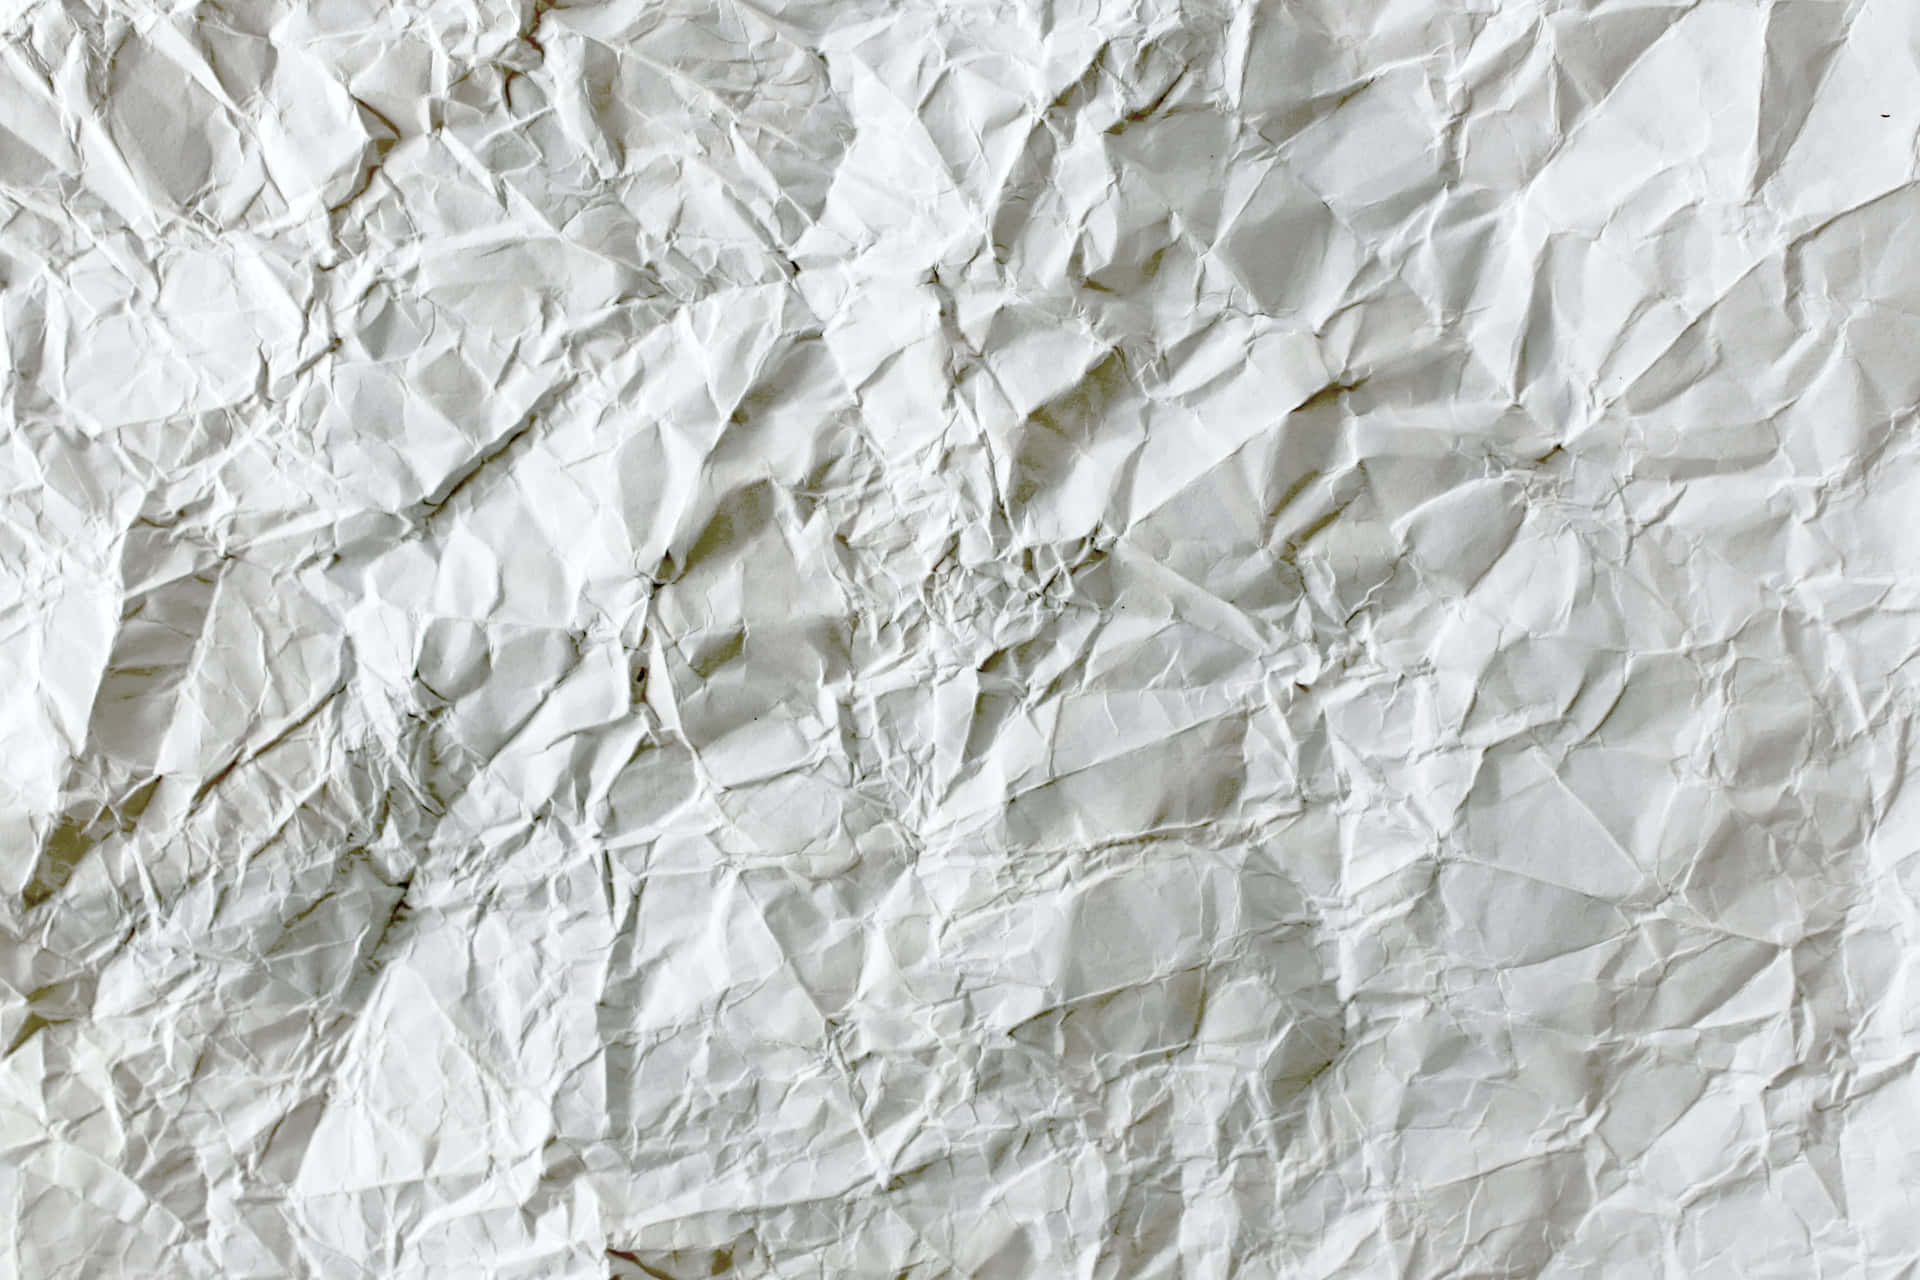 Simple yet Impactful - A Crumpled Paper